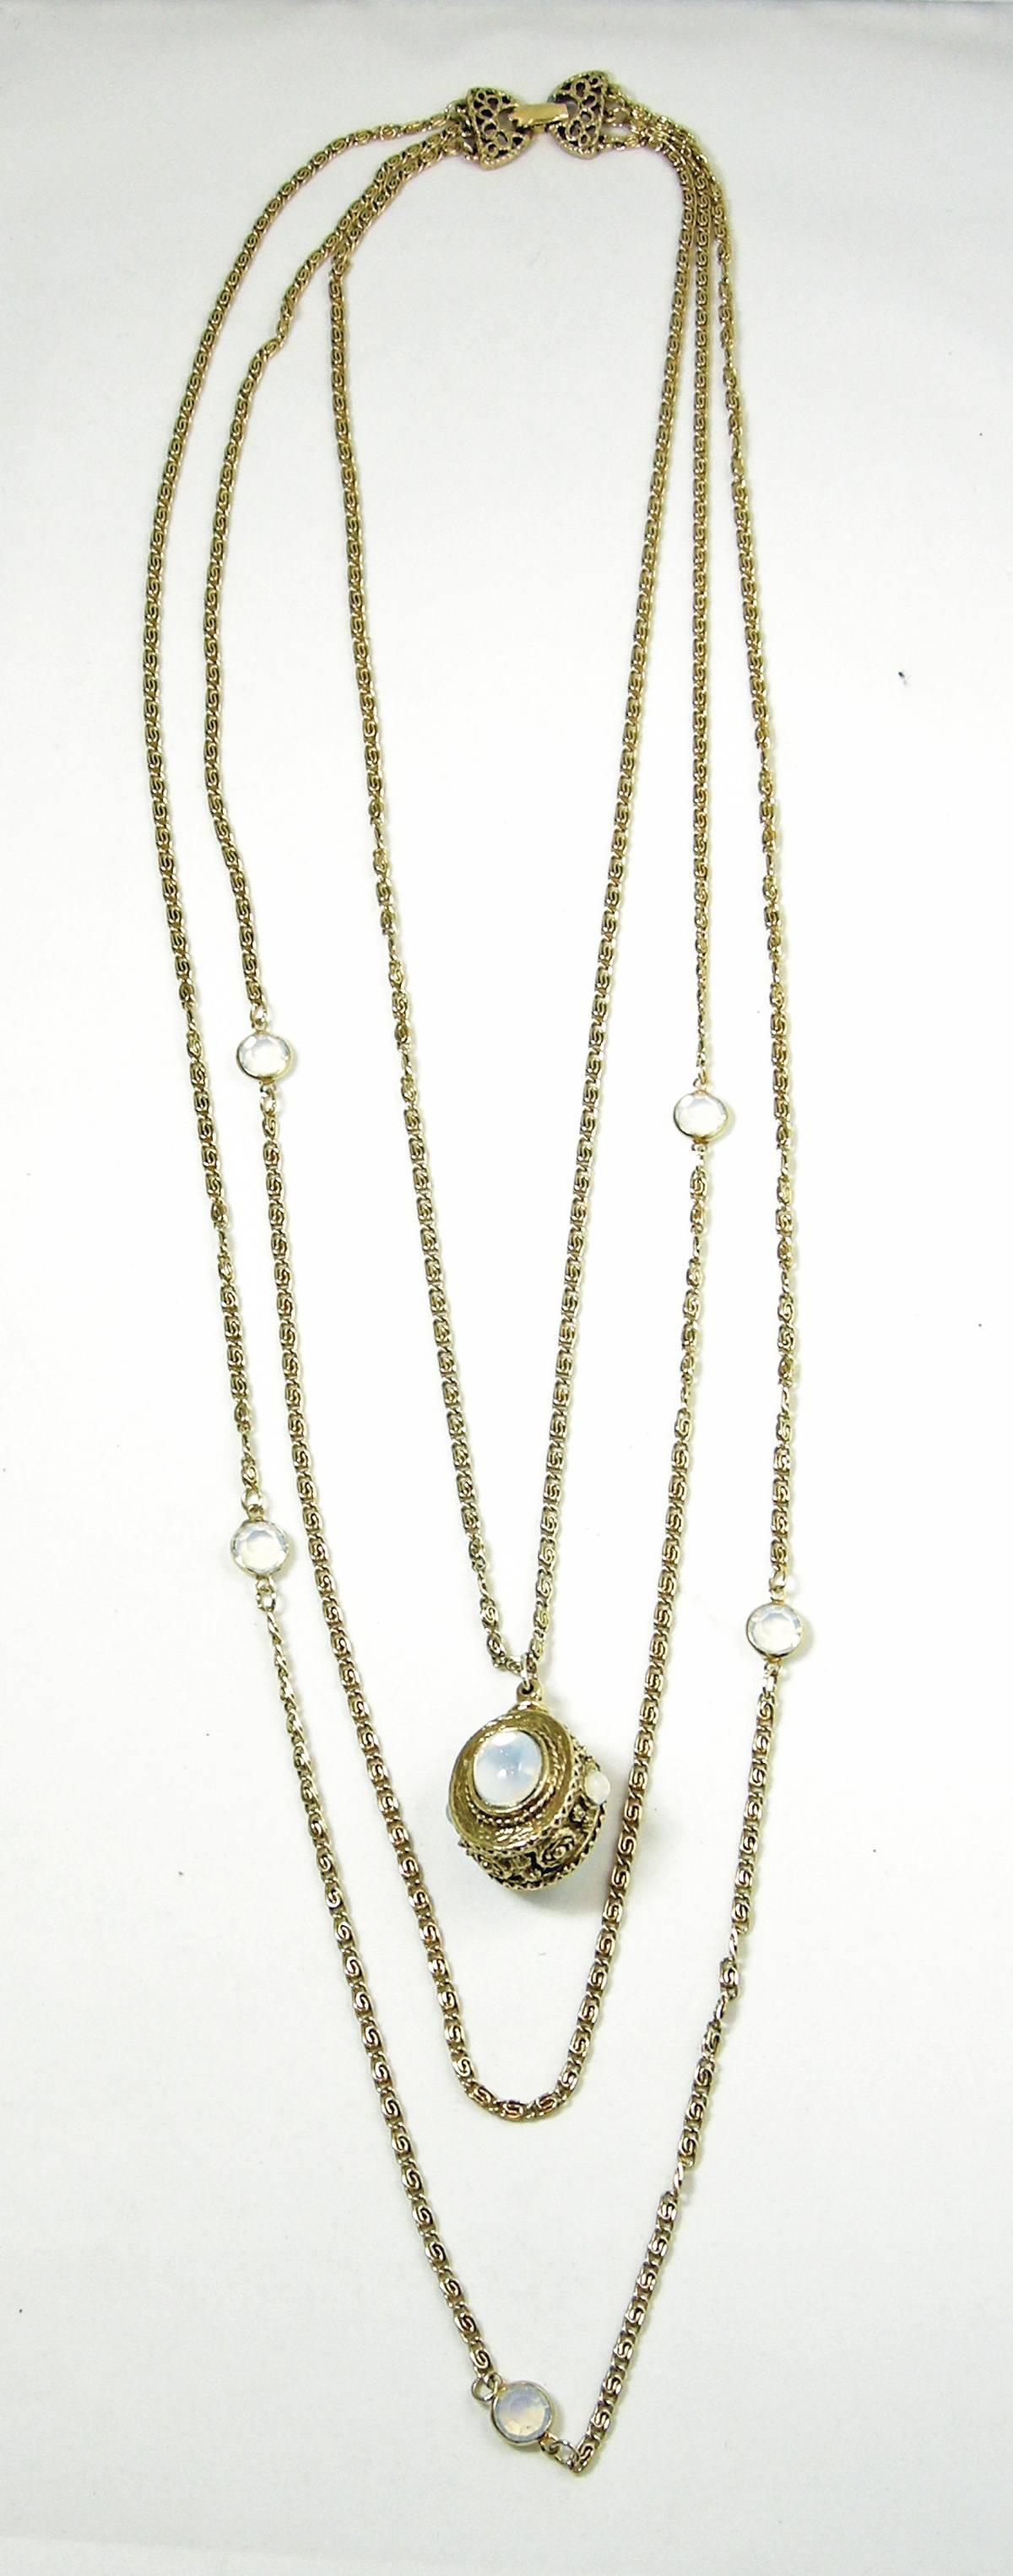 This is a 1950s vintage signed Goldette moonstone necklace that has 3 chains.  One chain has crystal moonstone accents.  The center has a faux moonstone cabochon set in an intricately designed pendant. The longest chain is approximately 36”. The